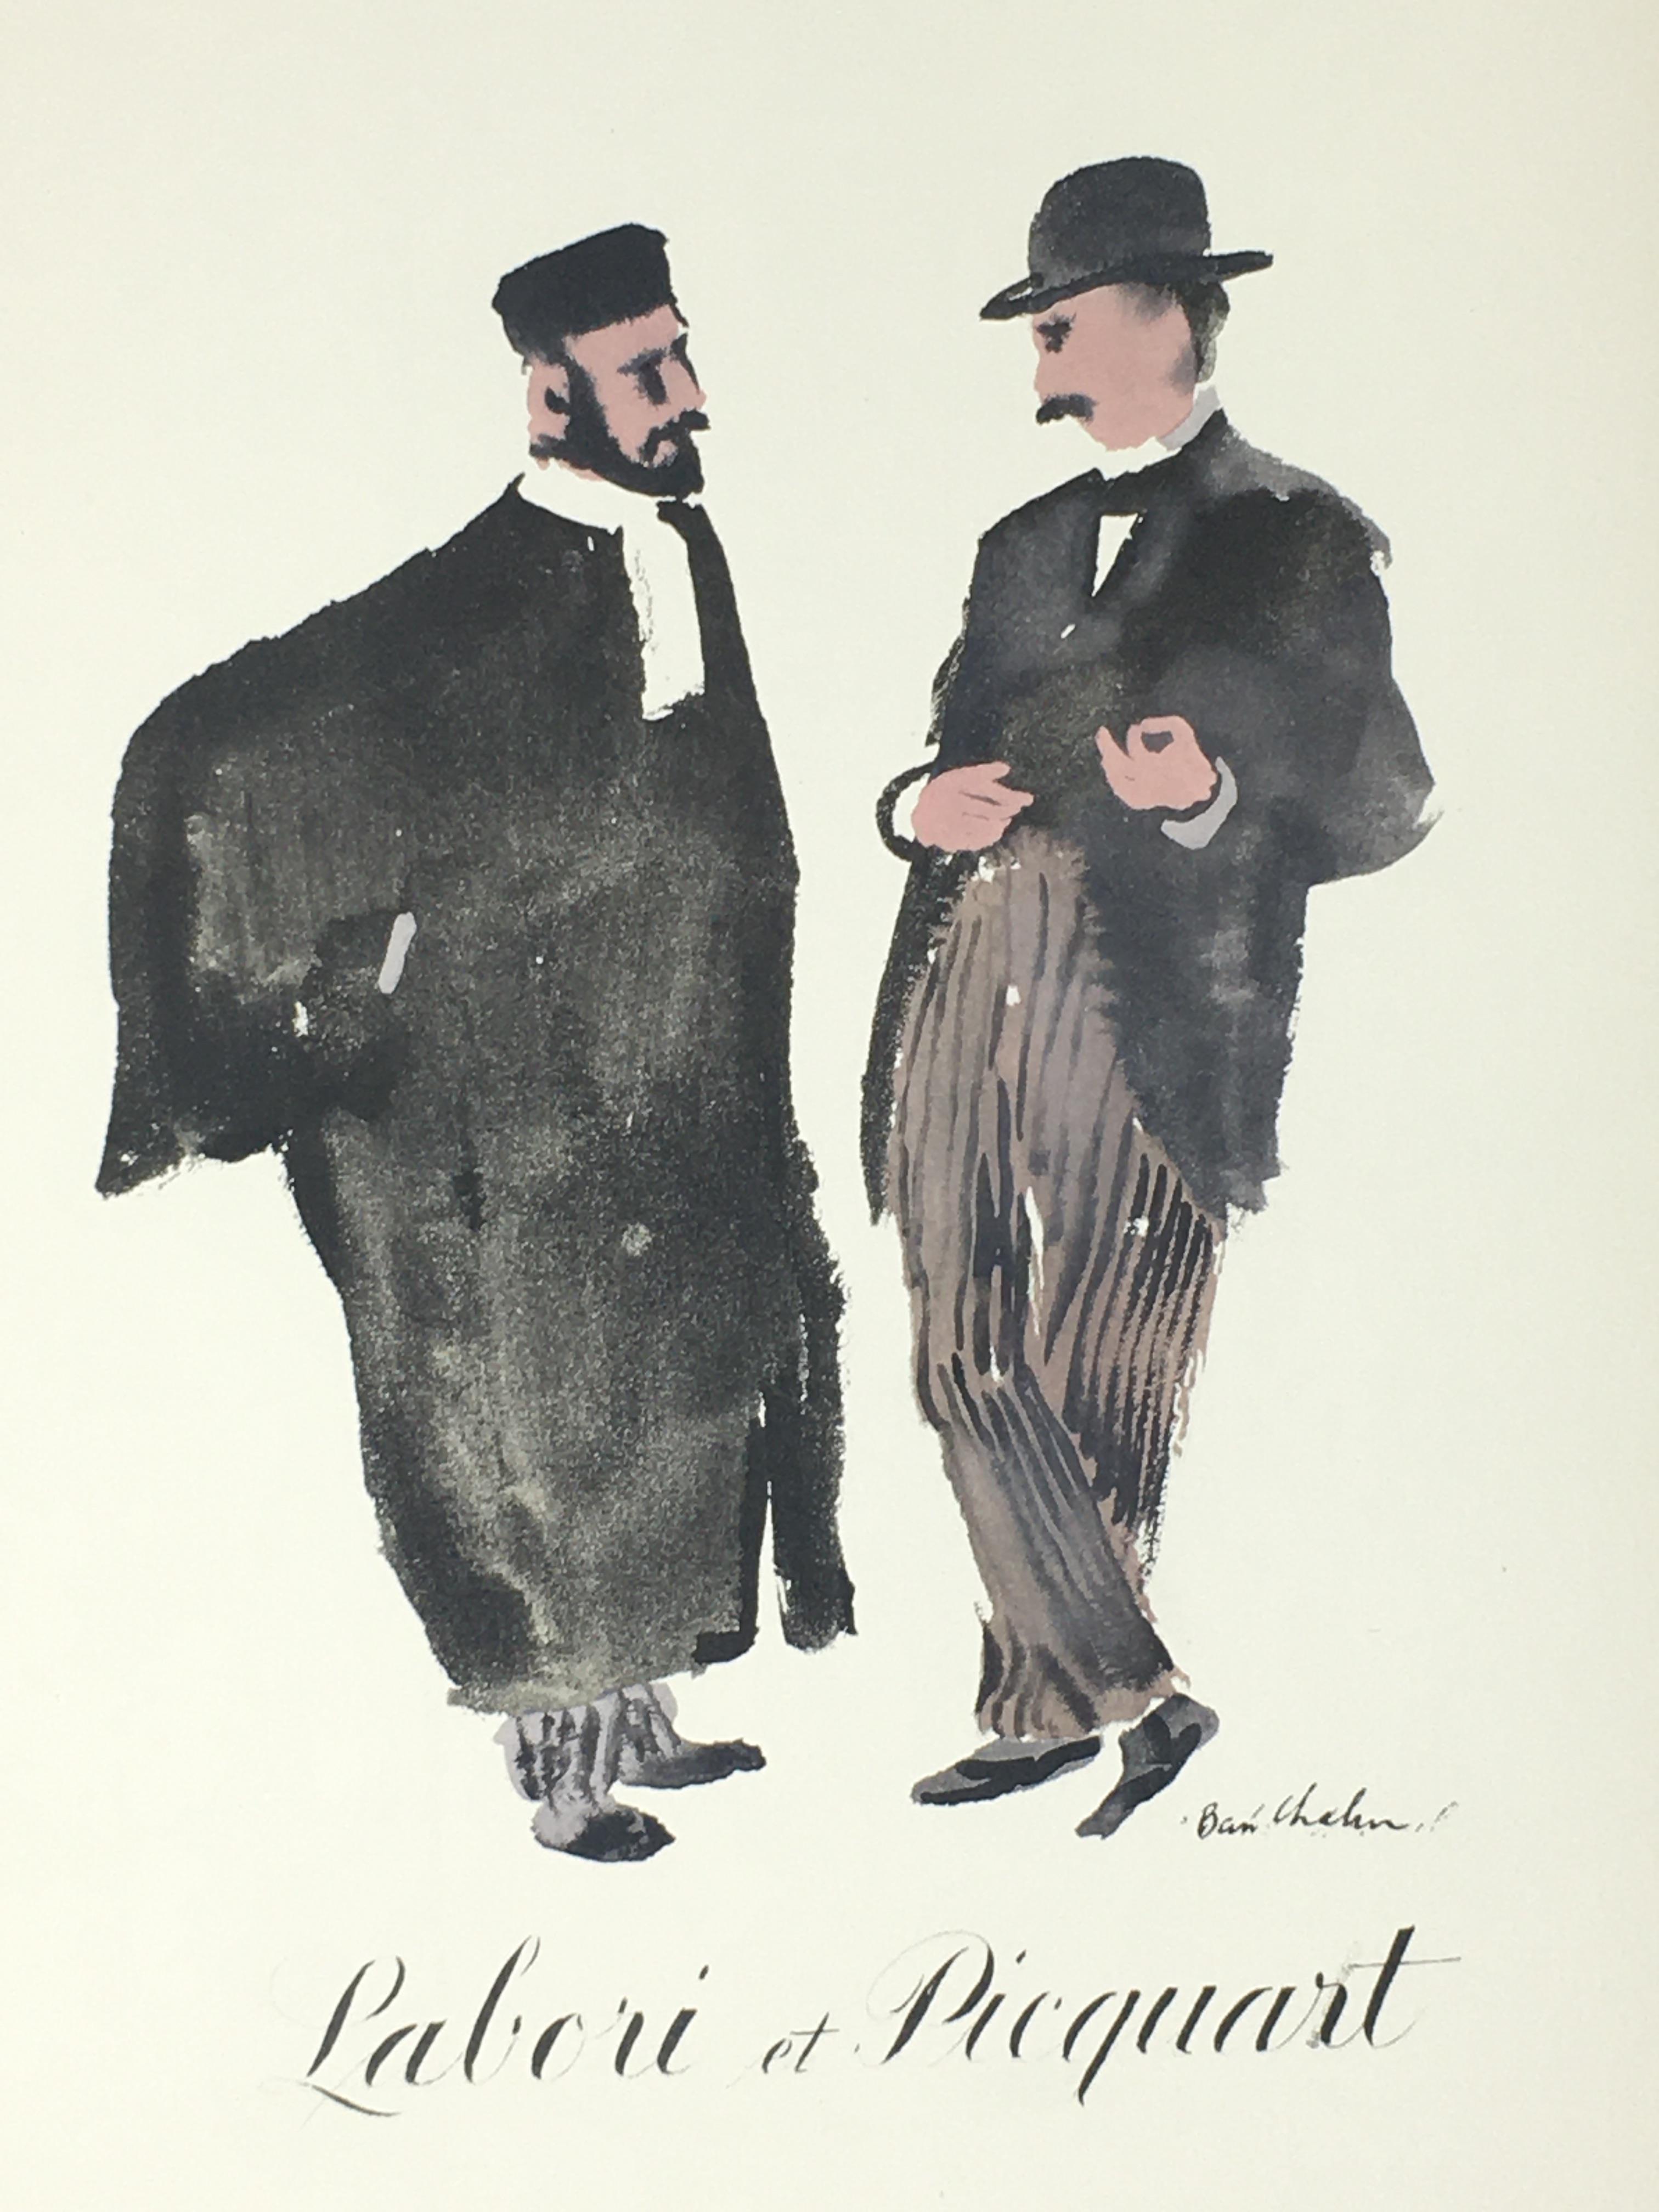 Dreyfus Affair - Book Collection featuring The Ben Shahn Prints (Limited First Edition) - Image 36 of 73